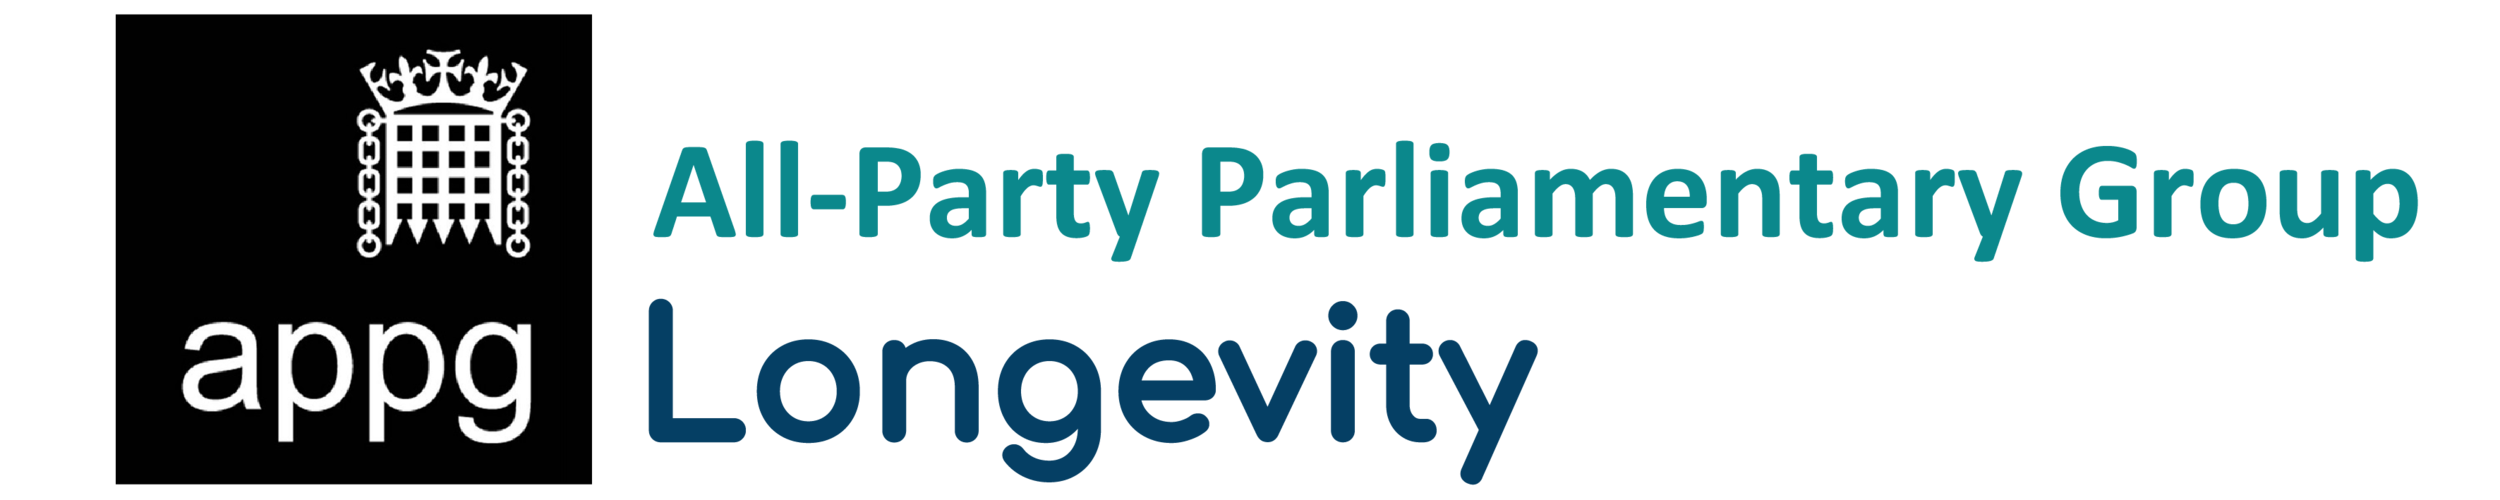 All Party Parliamentary Group for Longevity